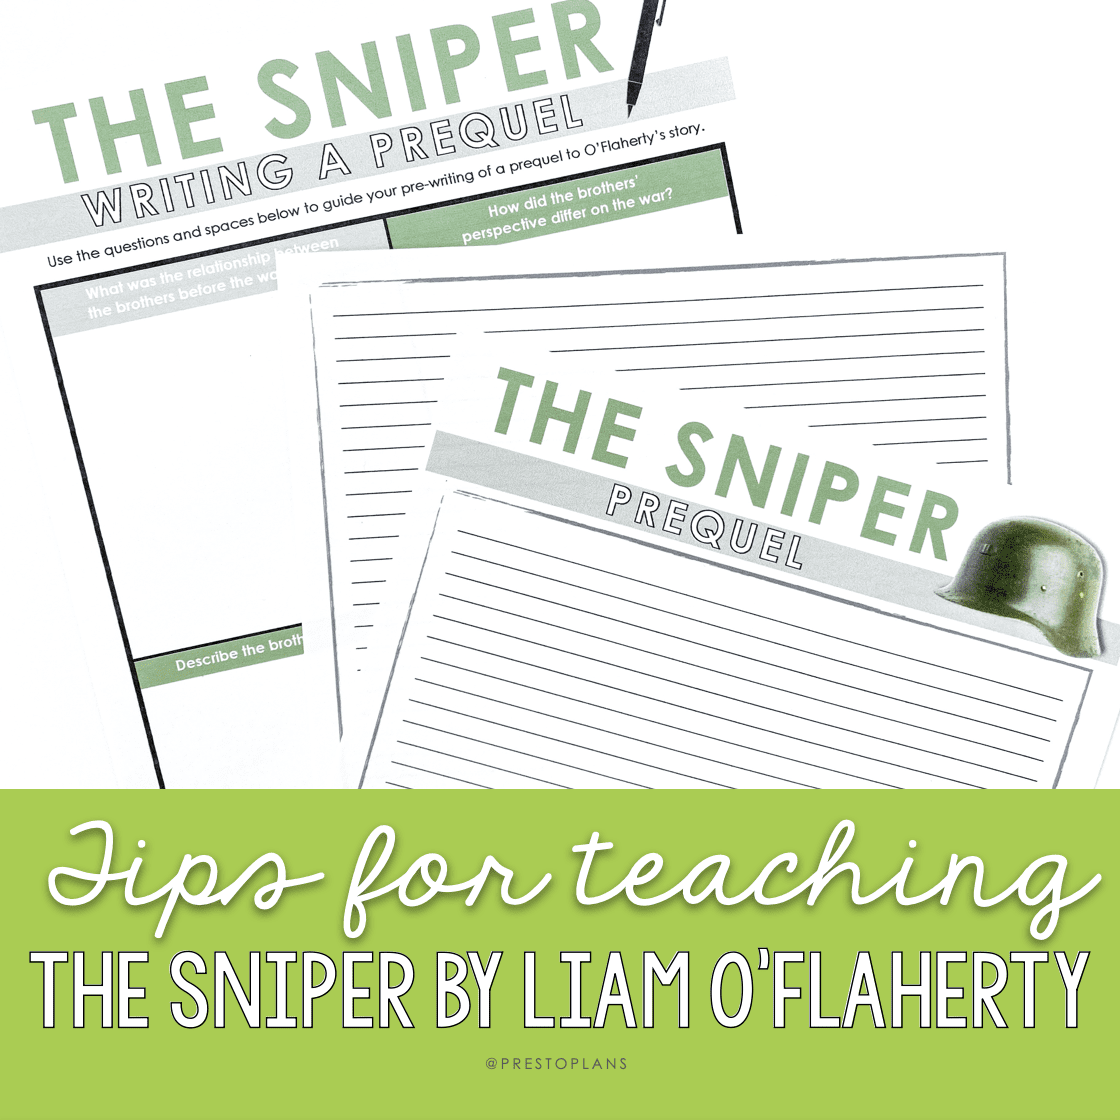 Teaching "The Sniper" by Liam O'Flaherty can help students understand the historical fiction genre